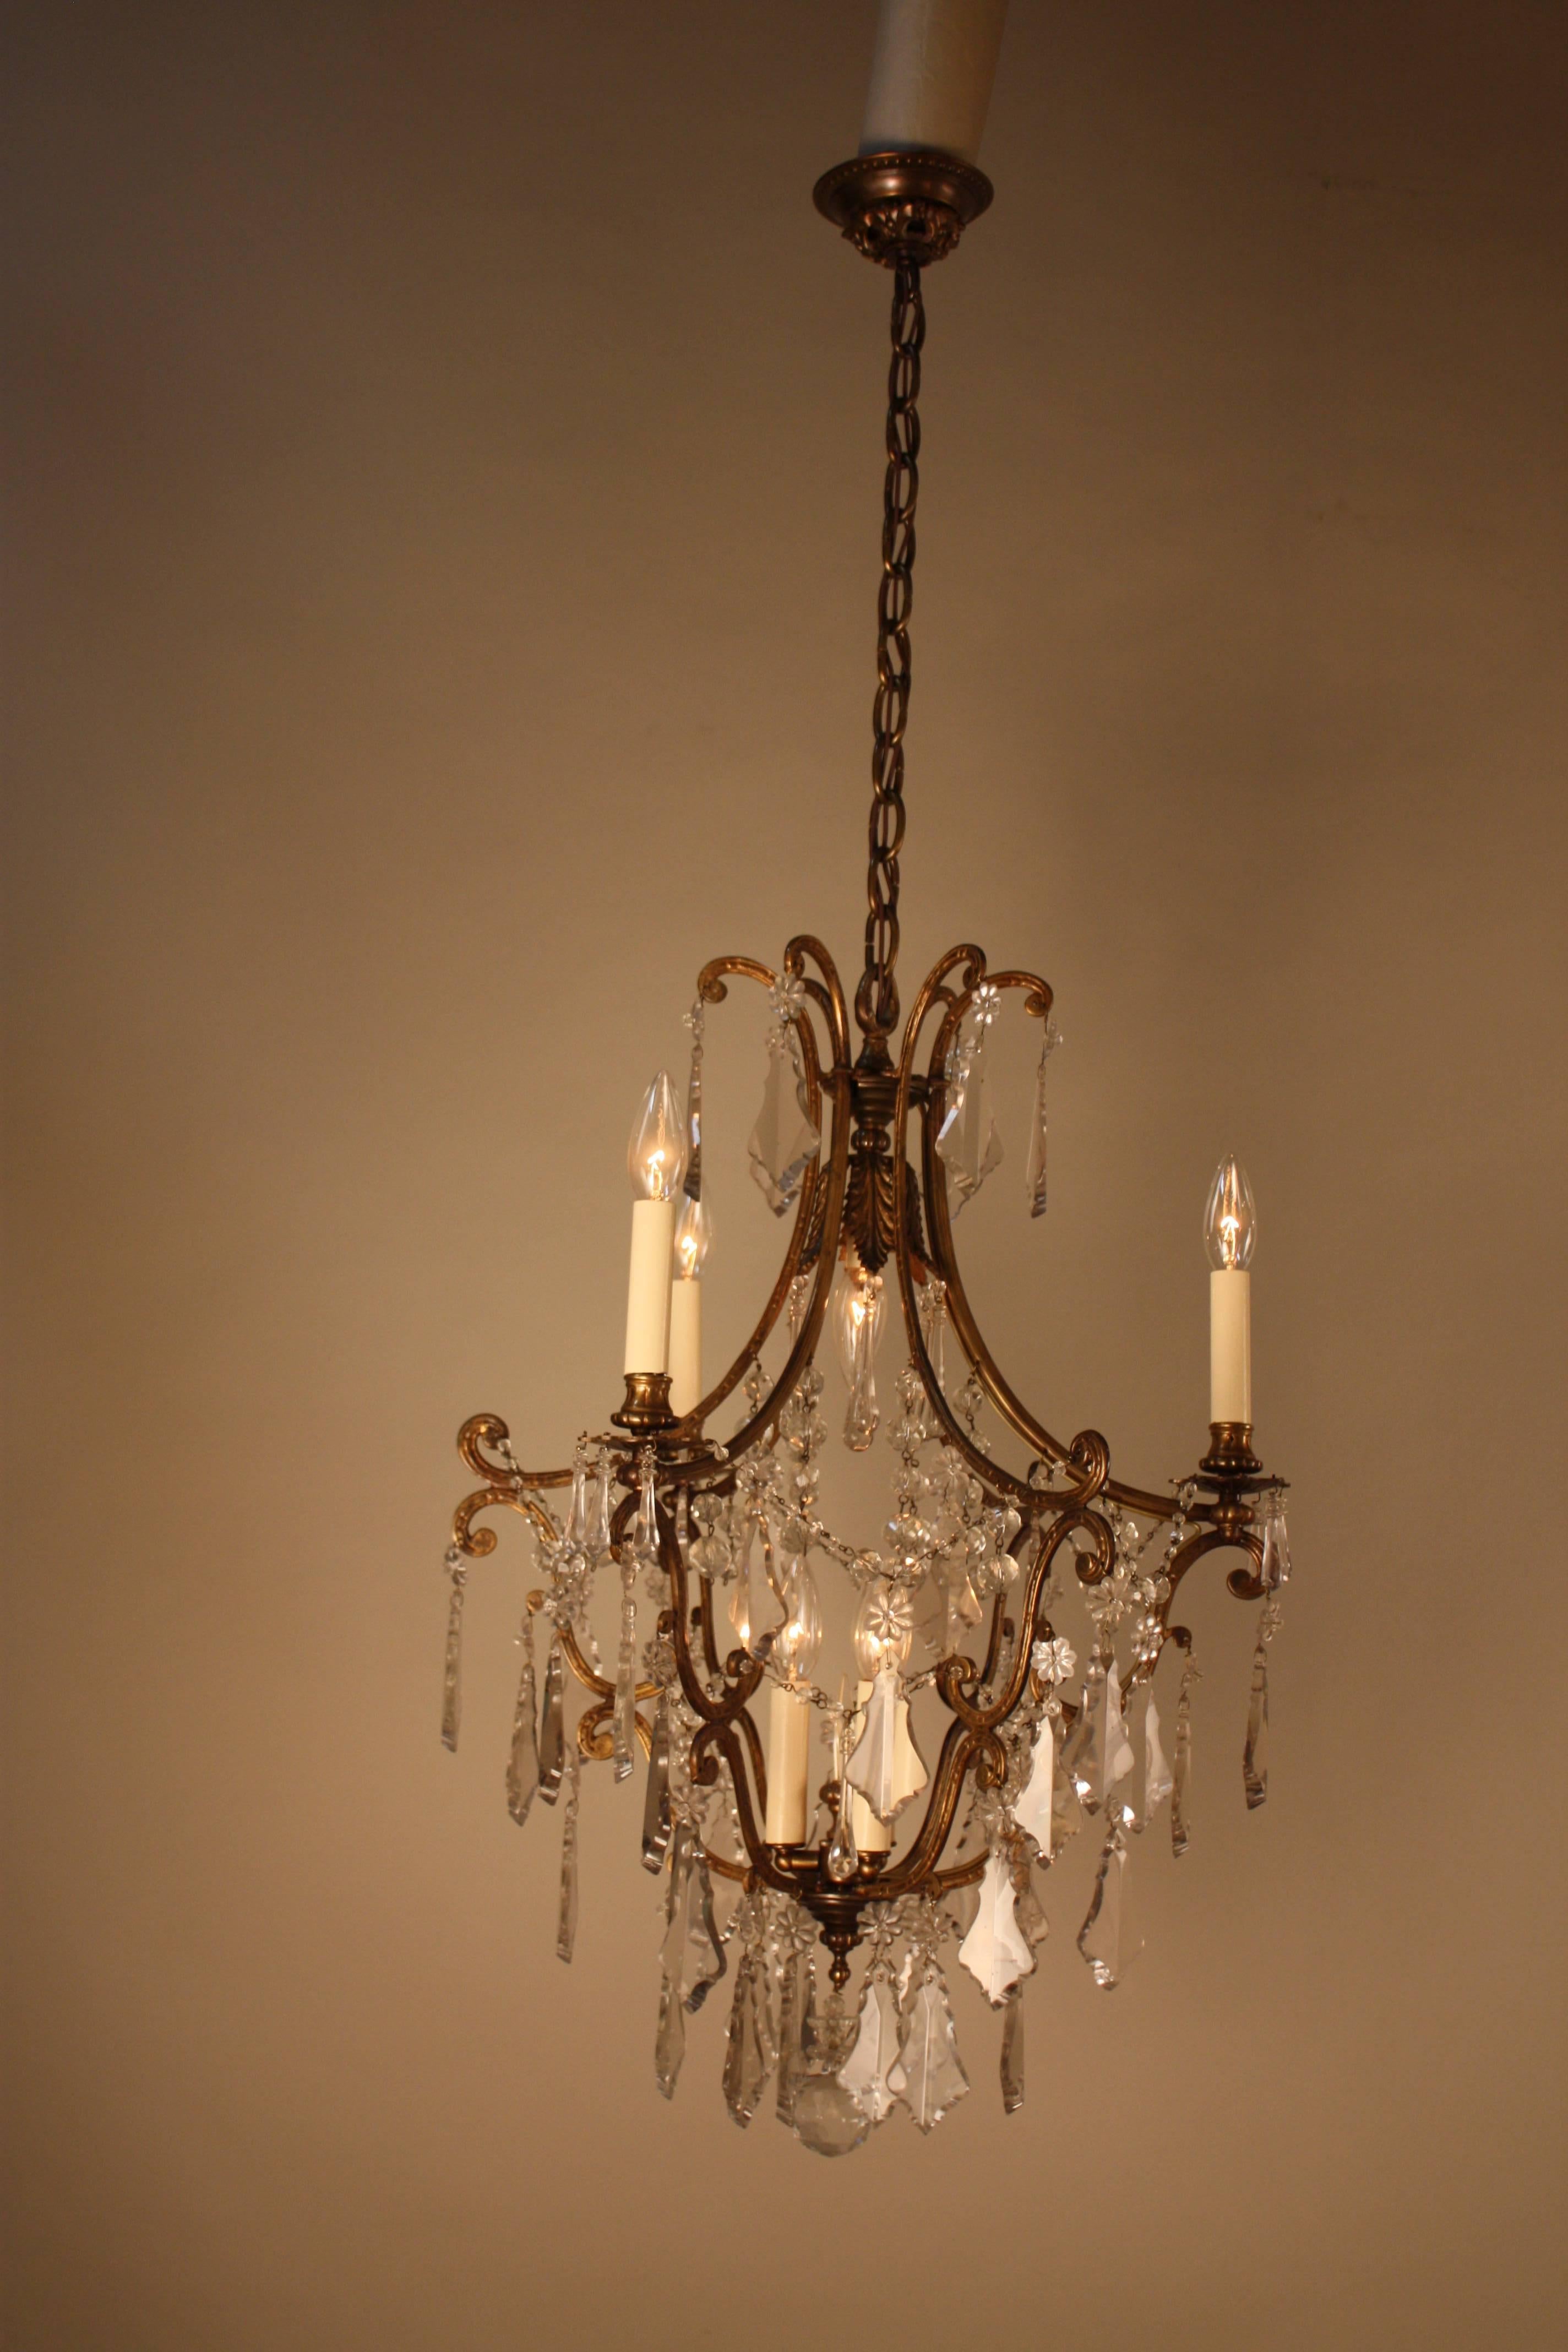 Elegant Spanish, 1930s seven-light crystal and bronze chandelier.
The total height of this chandelier with all the chain is 46